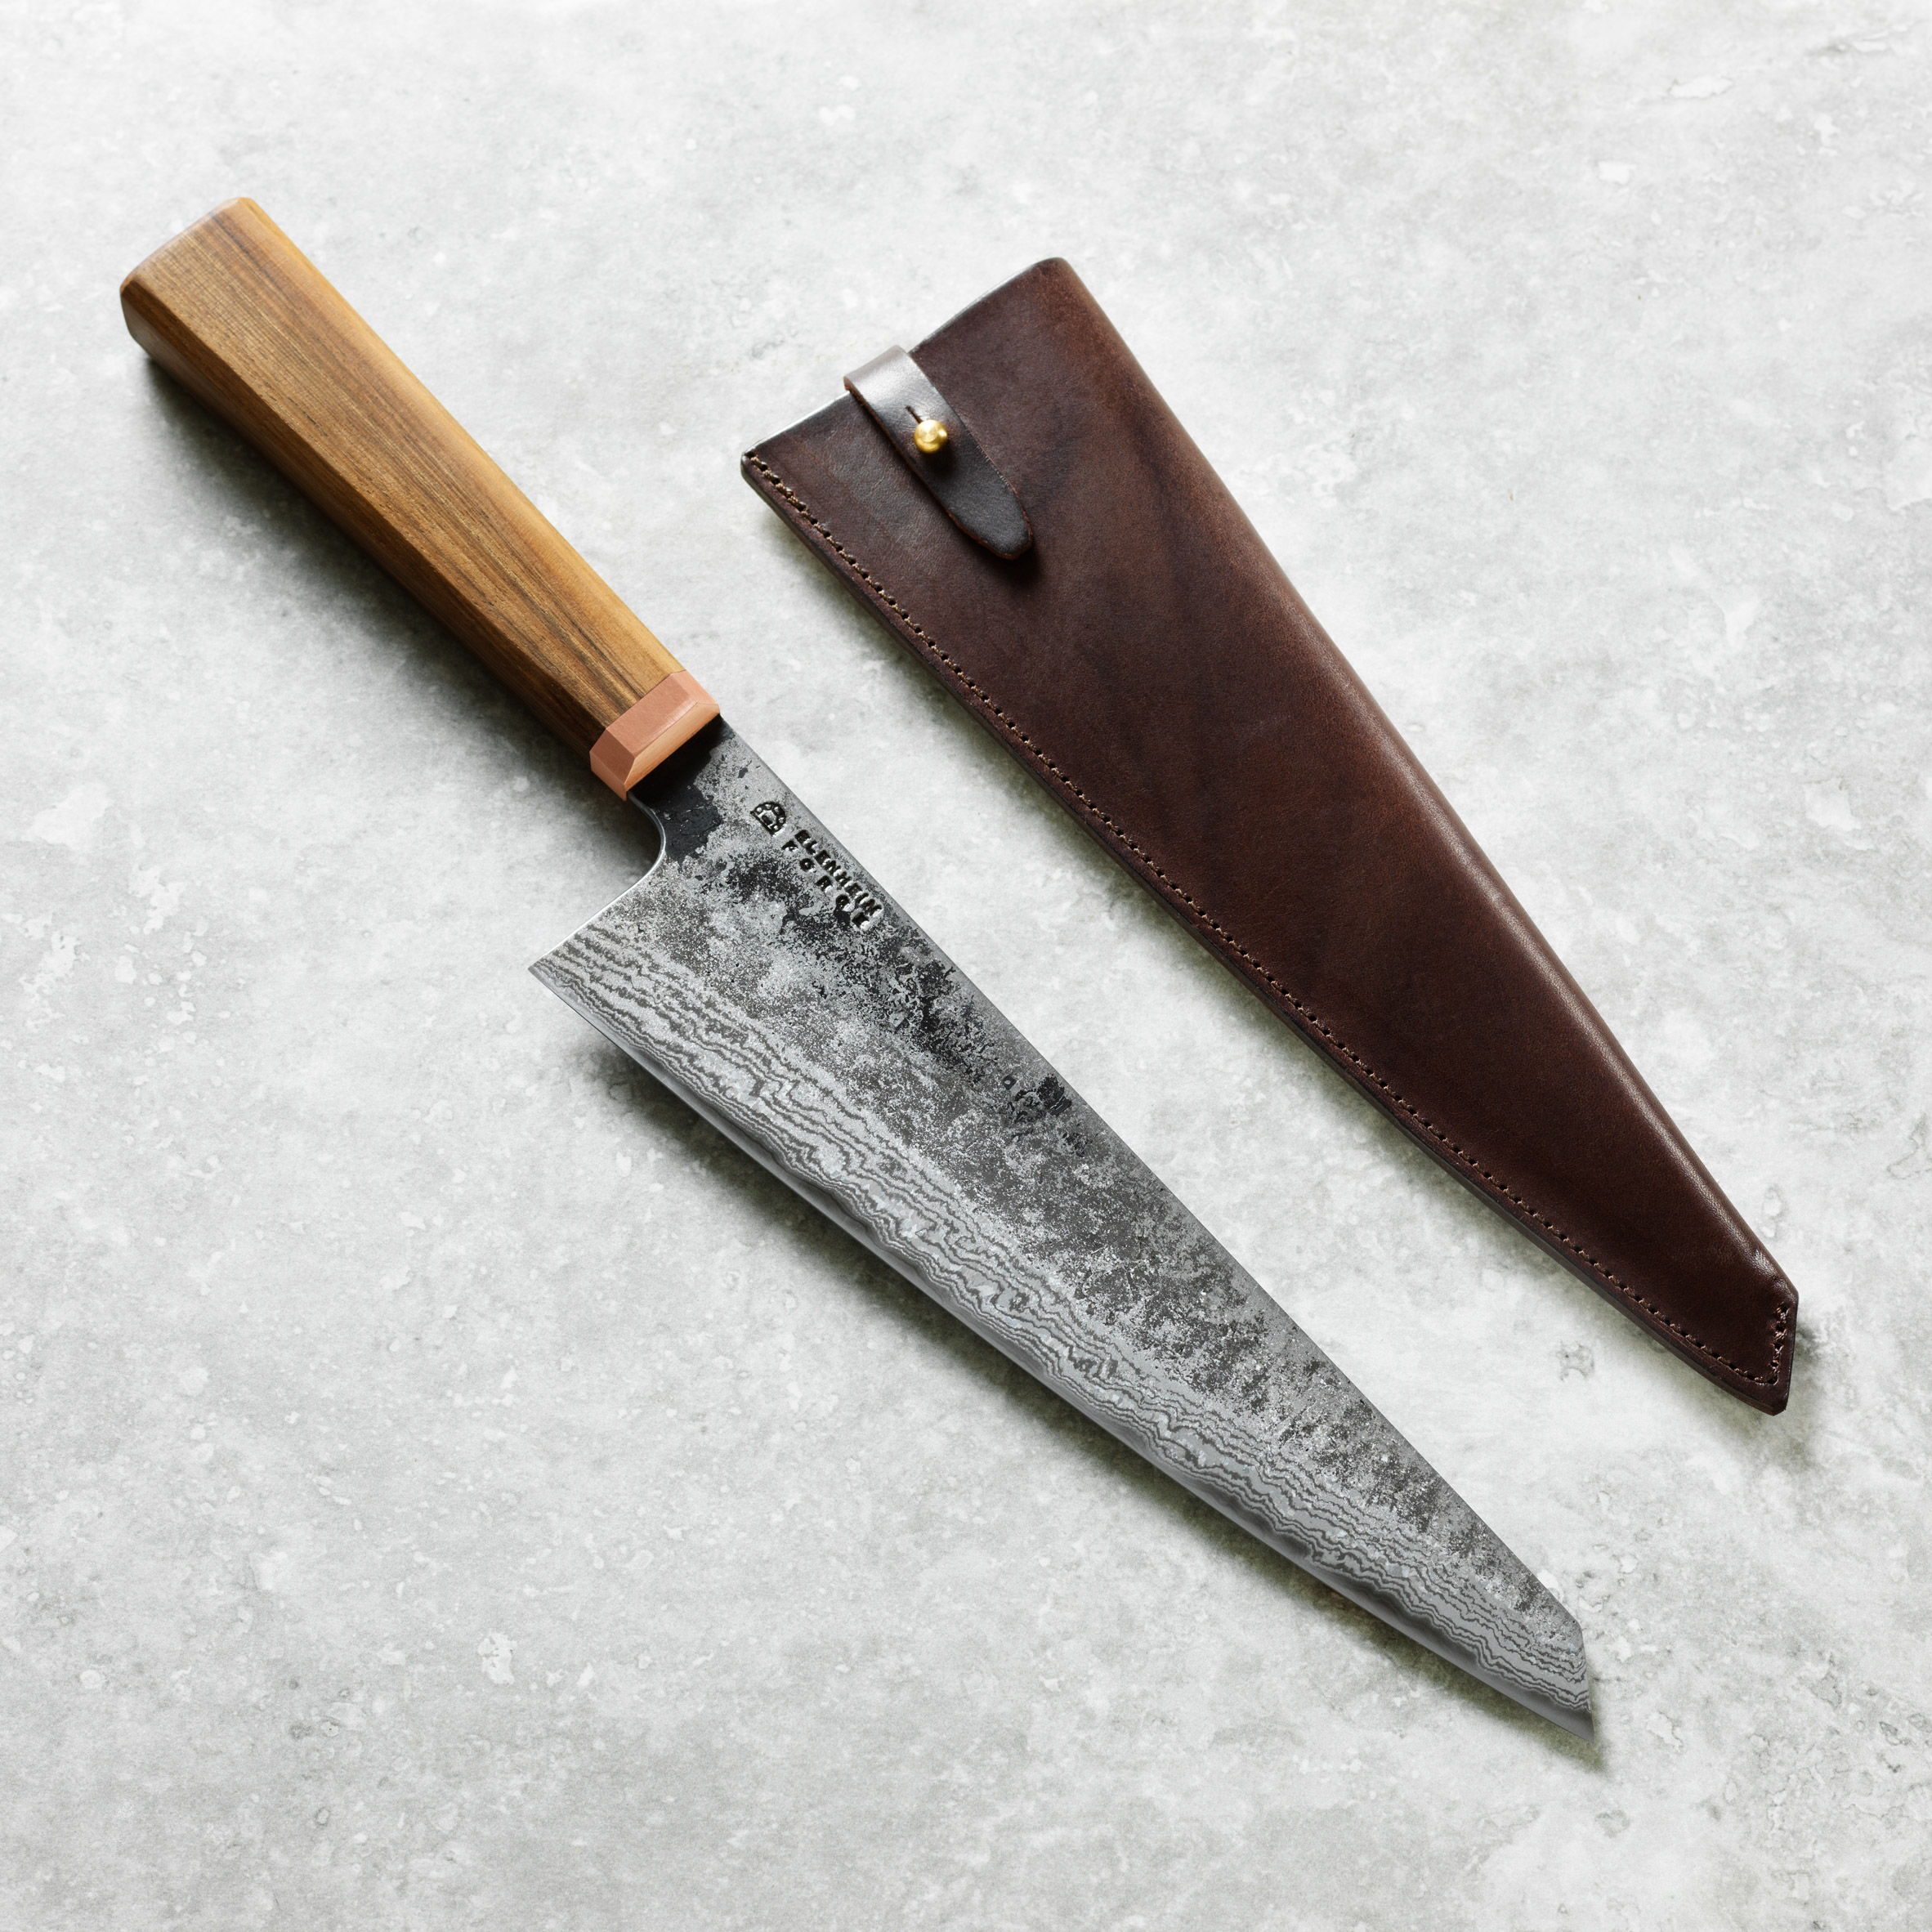 Competition: a bespoke hand-crafted by Blenheim Knives